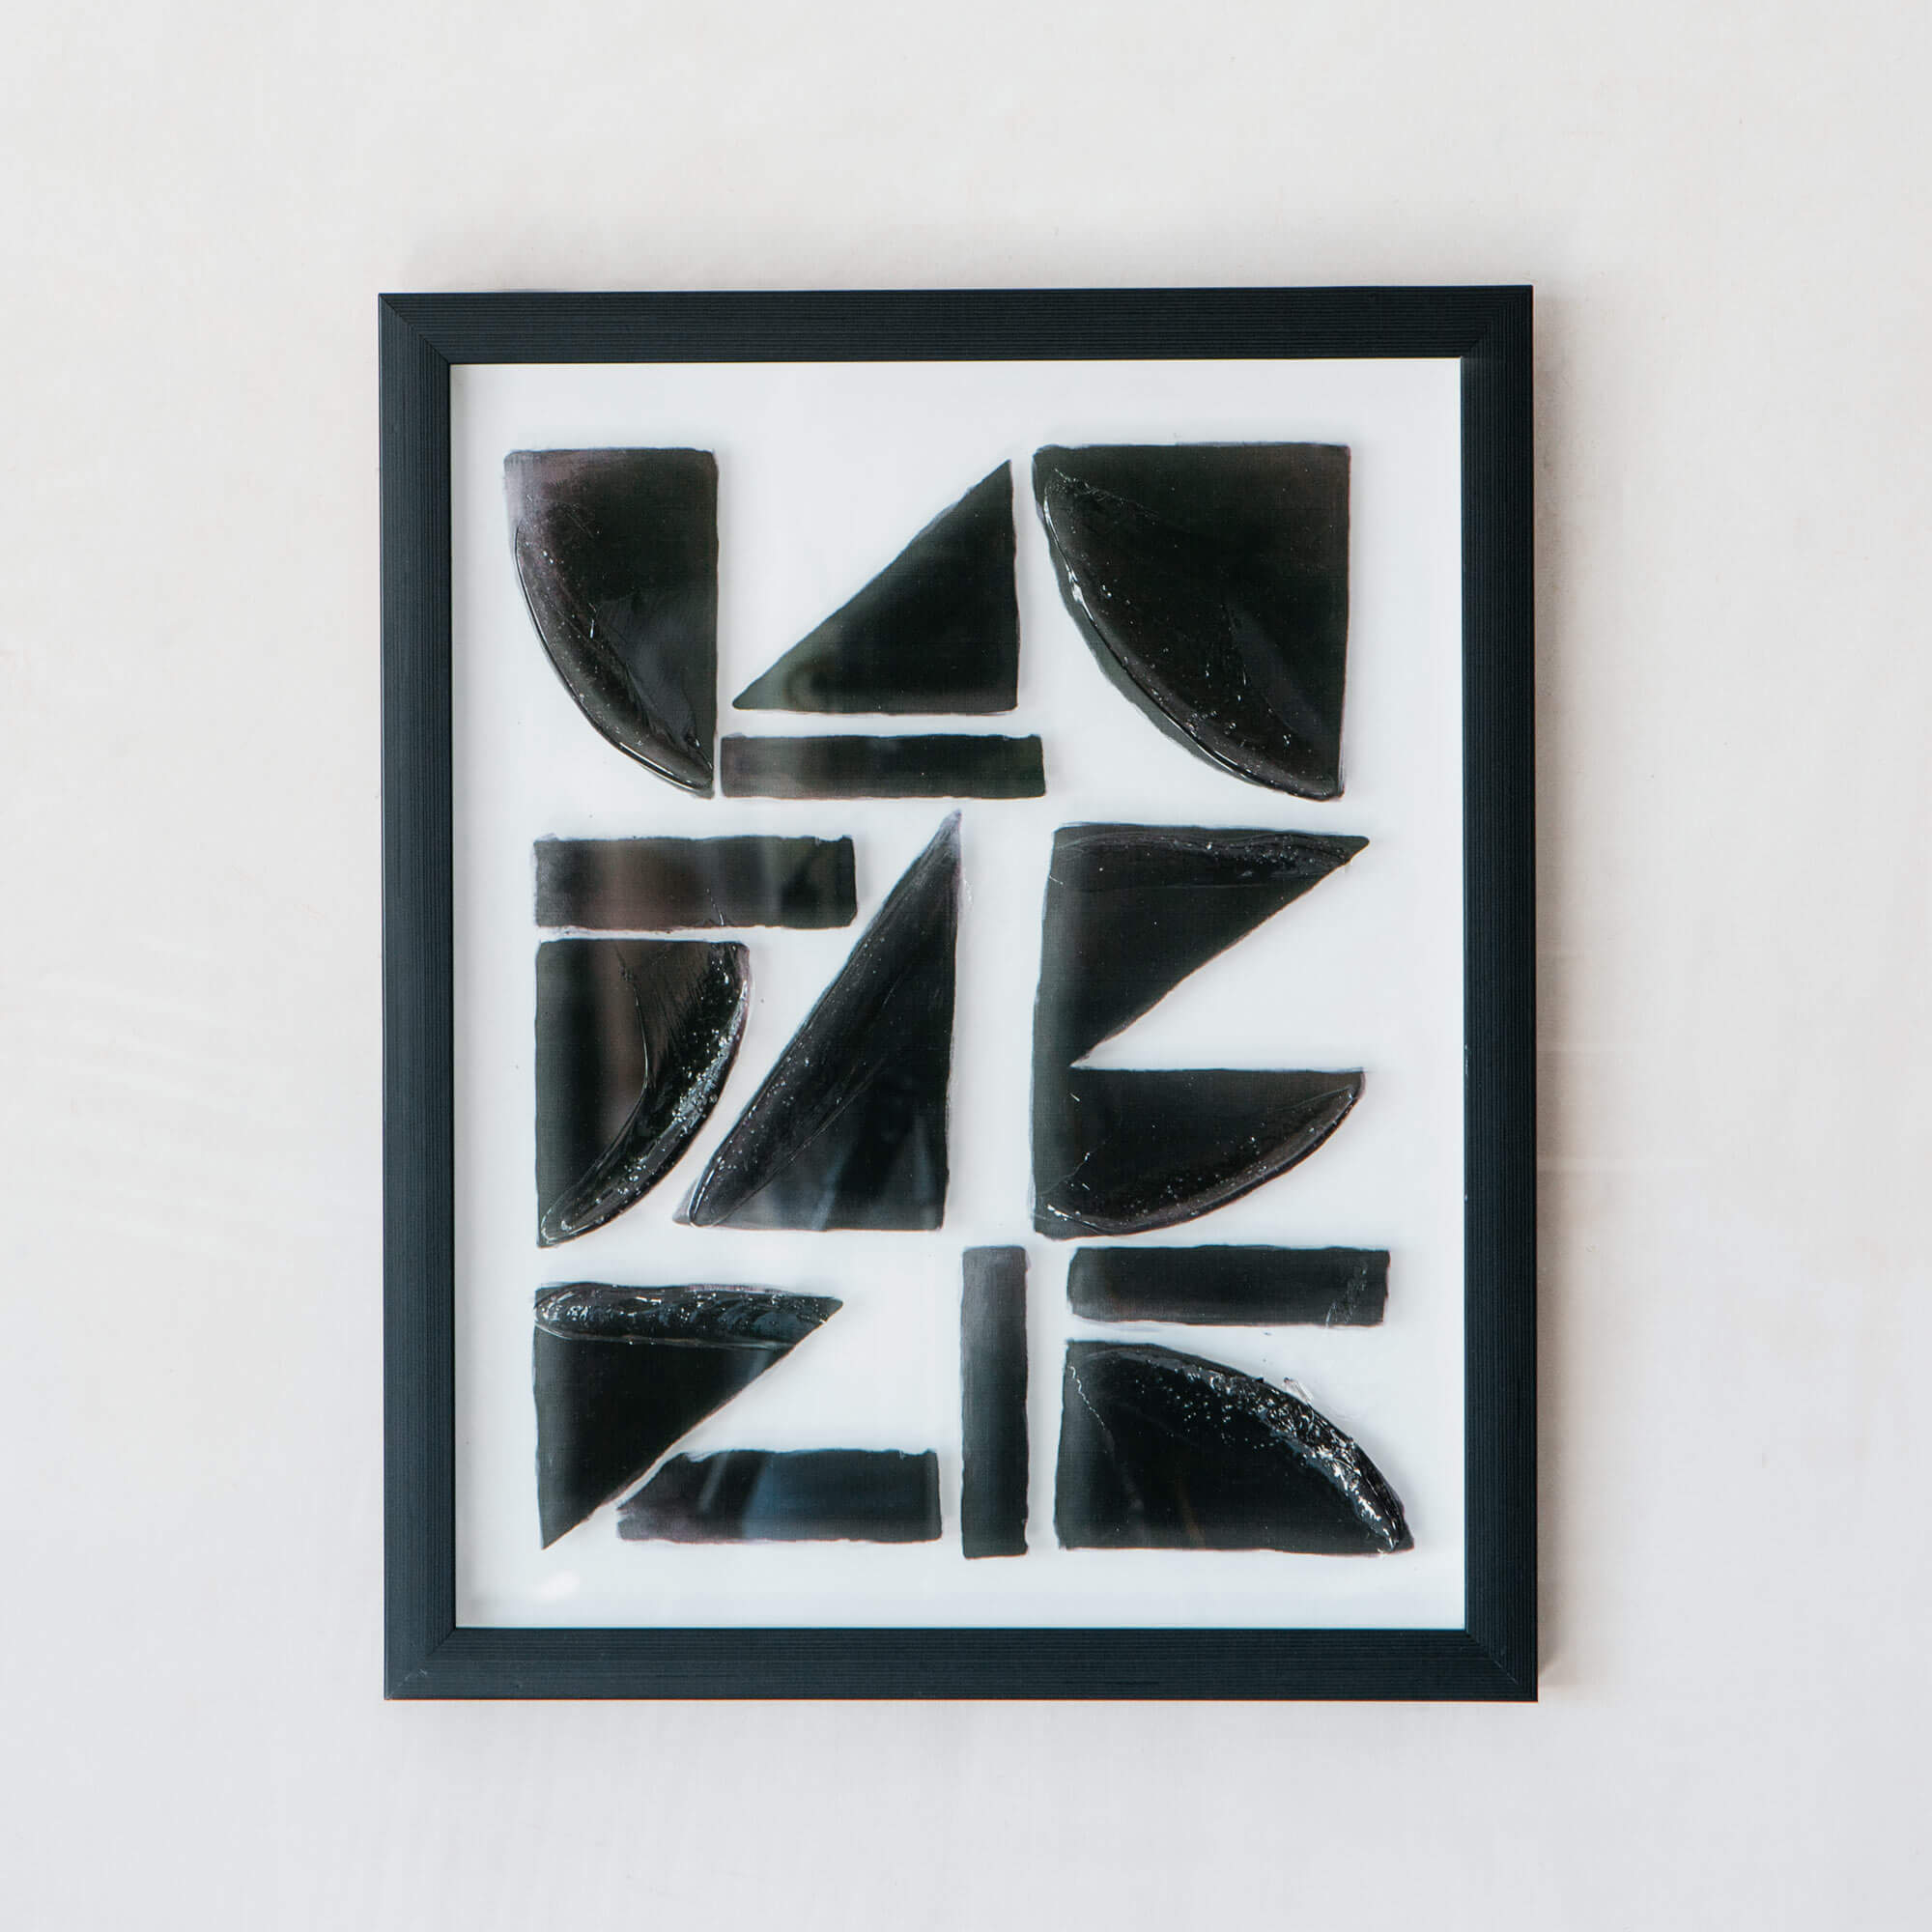 Read more about Graham and green framed black abstract shapes print